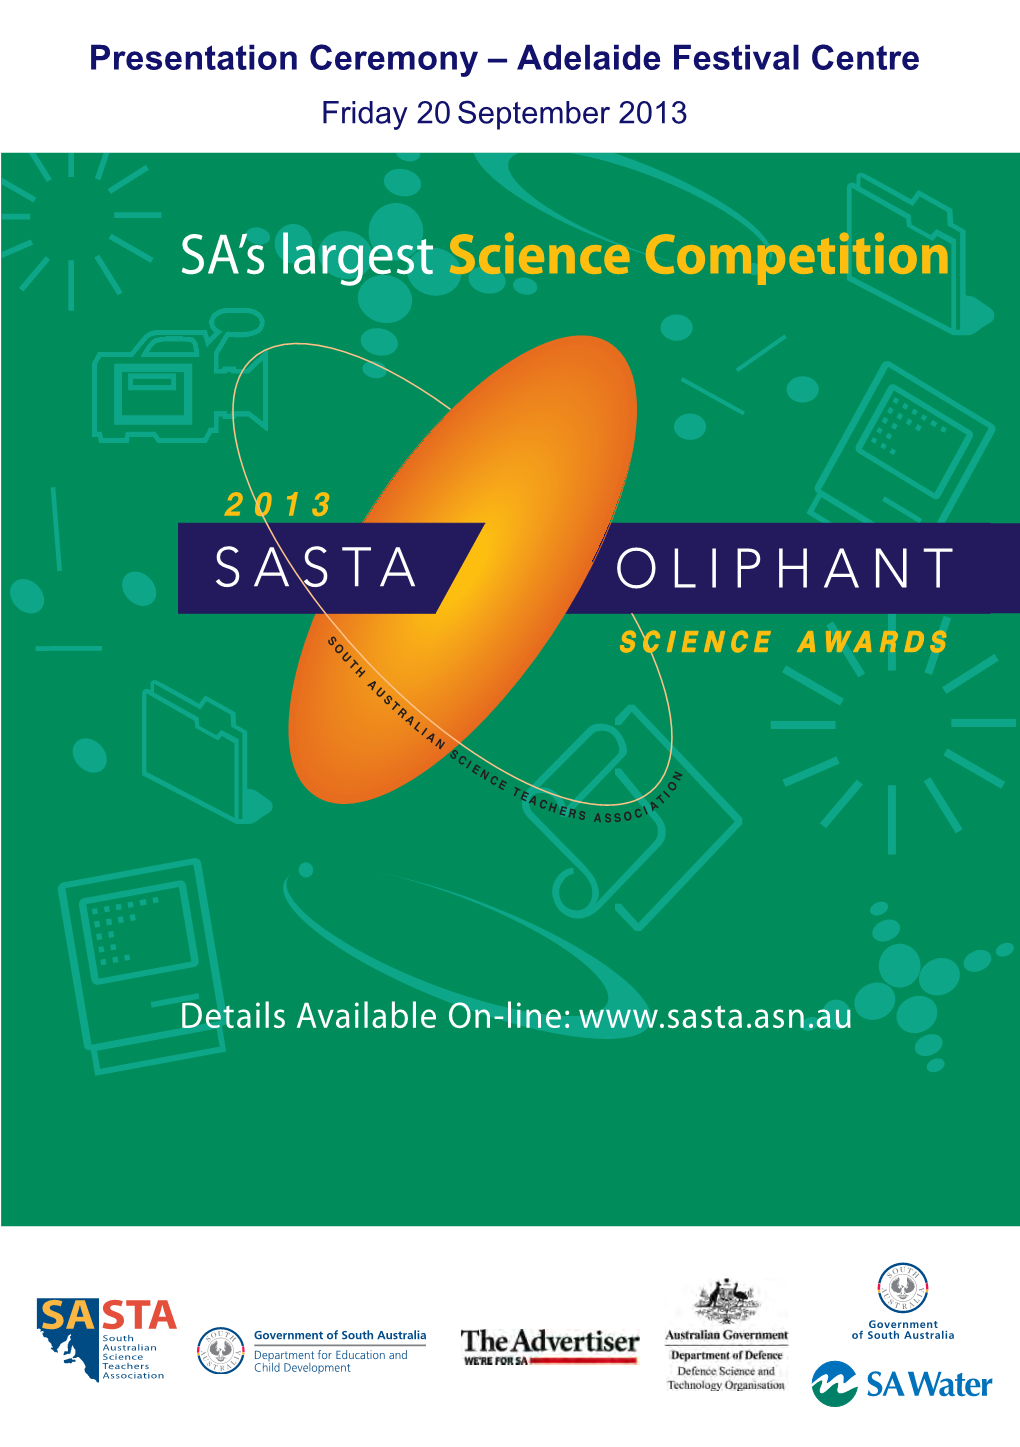 SA's Largest Science Competition